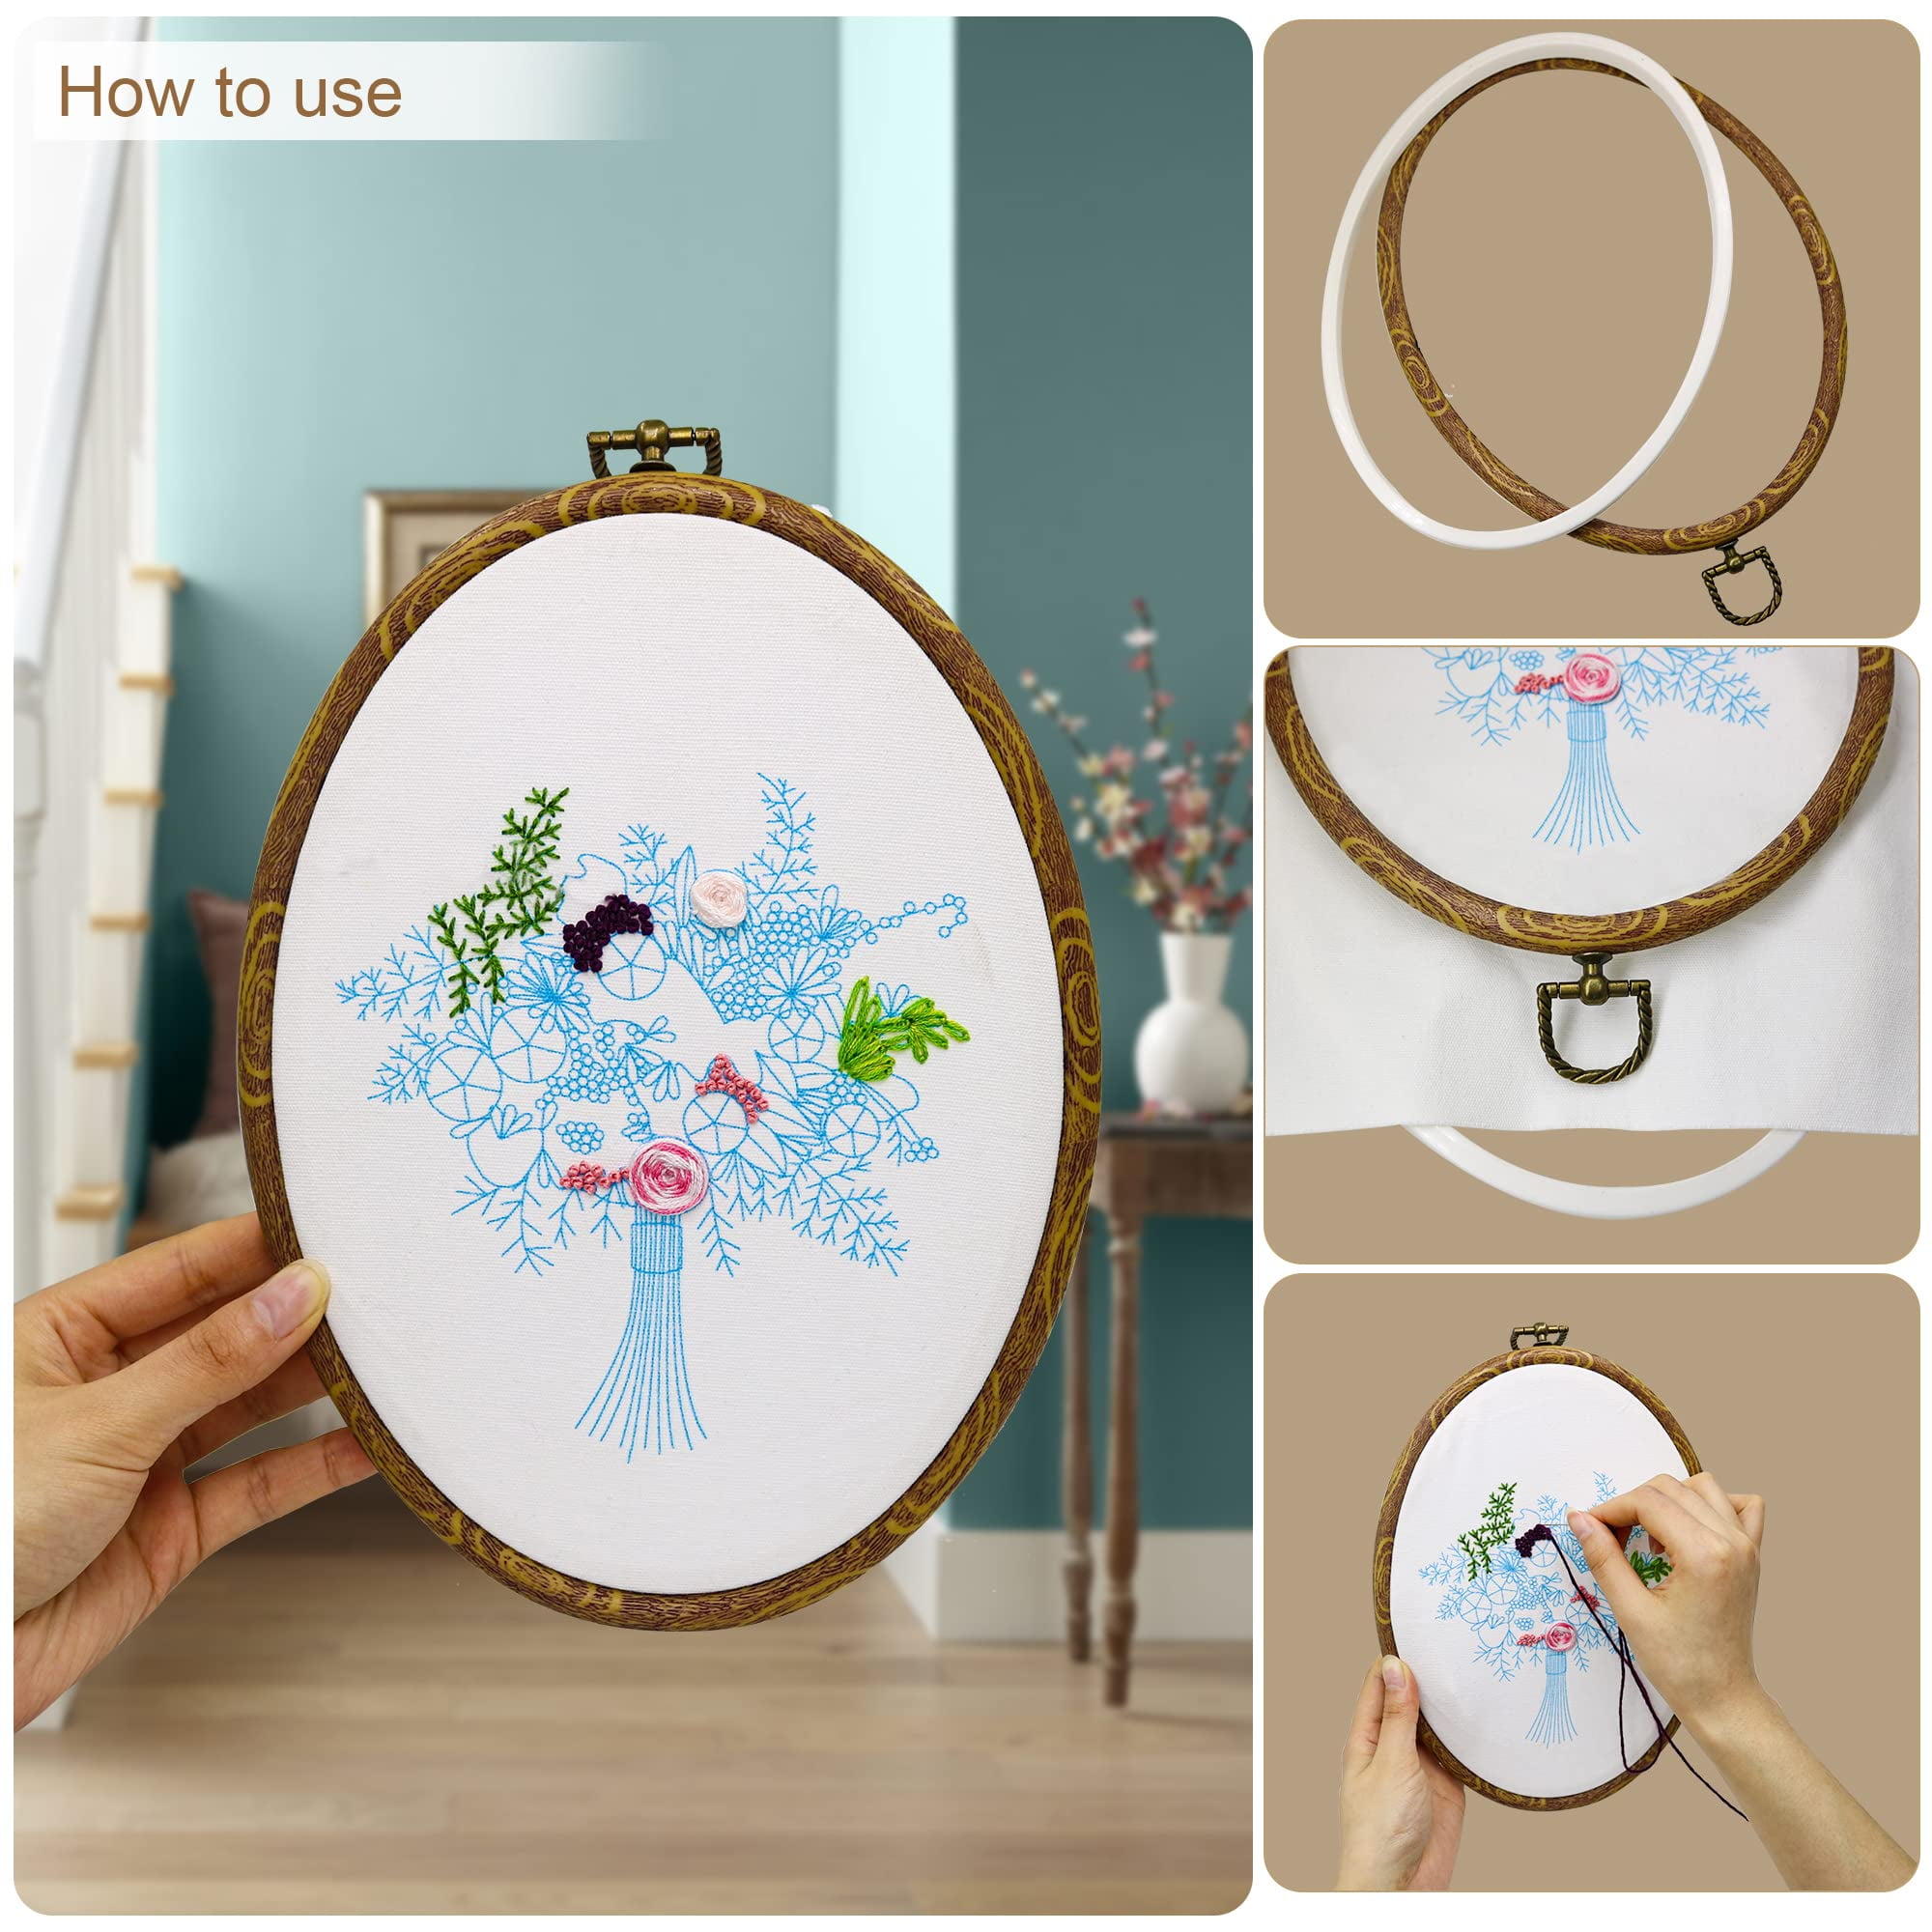 10cm Embroidery Hoop Frames for Display - Oval Small Cross Stitch